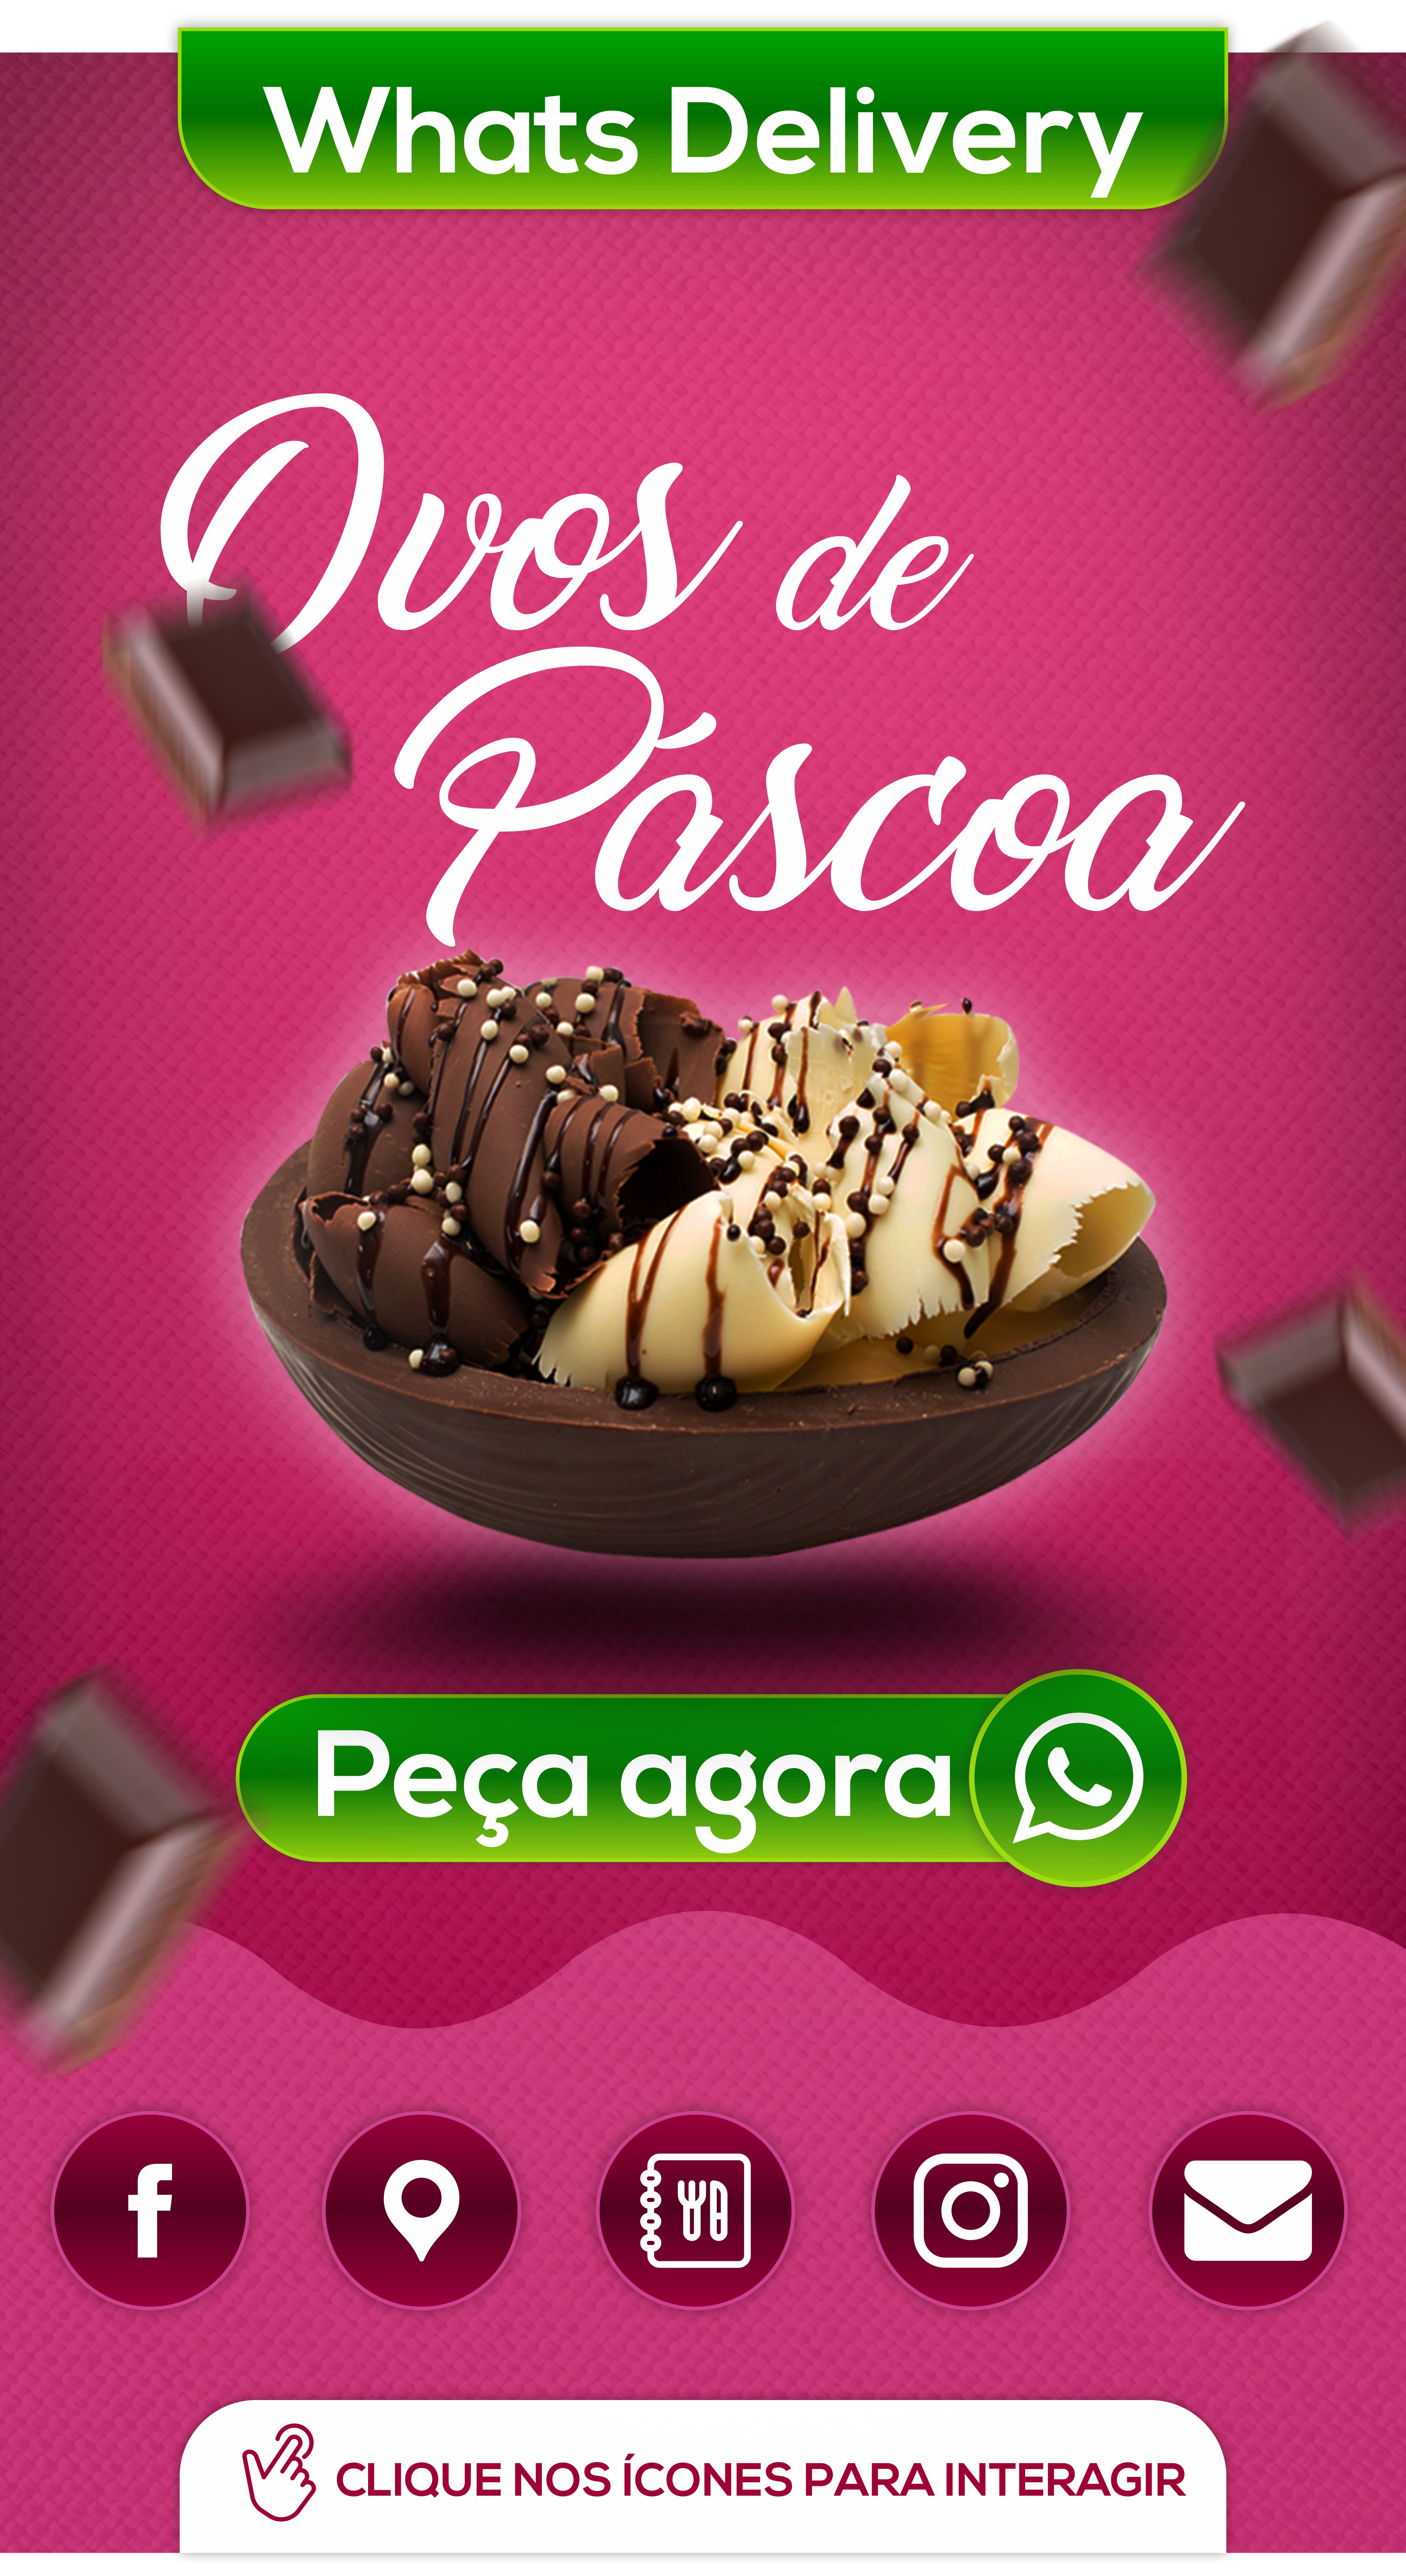 DELIVERY_PASCOA